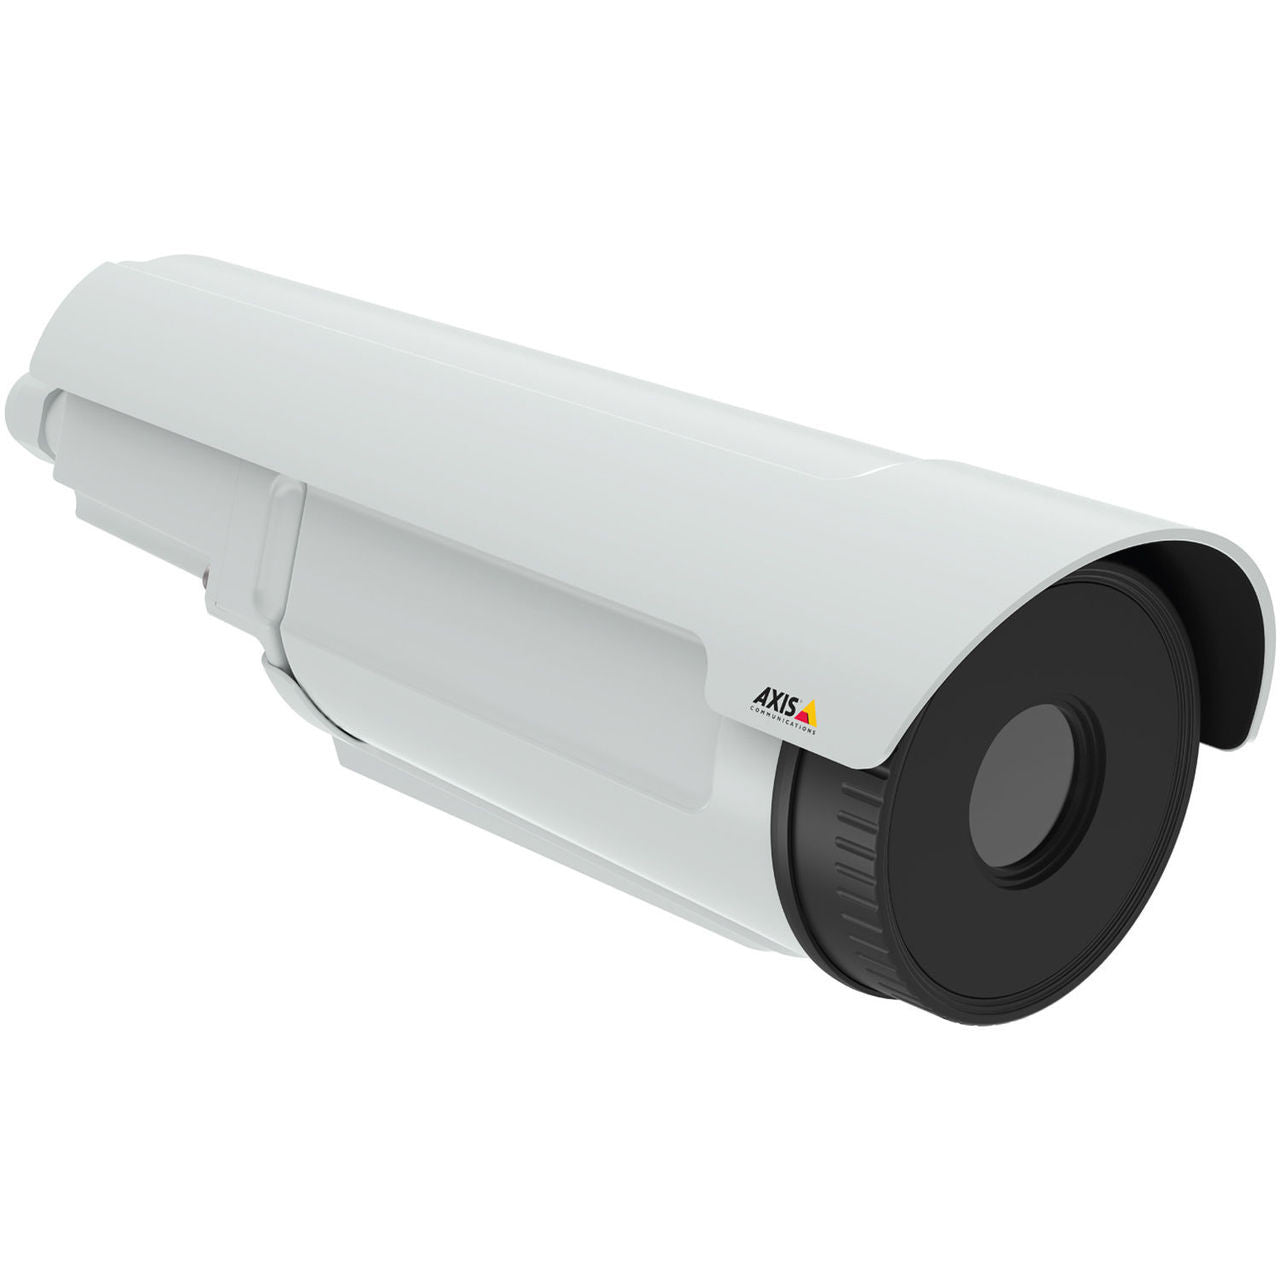 AXIS Q2901-E PT Mount (0646-001) 9mm 8.3fps Thermal Network Camera